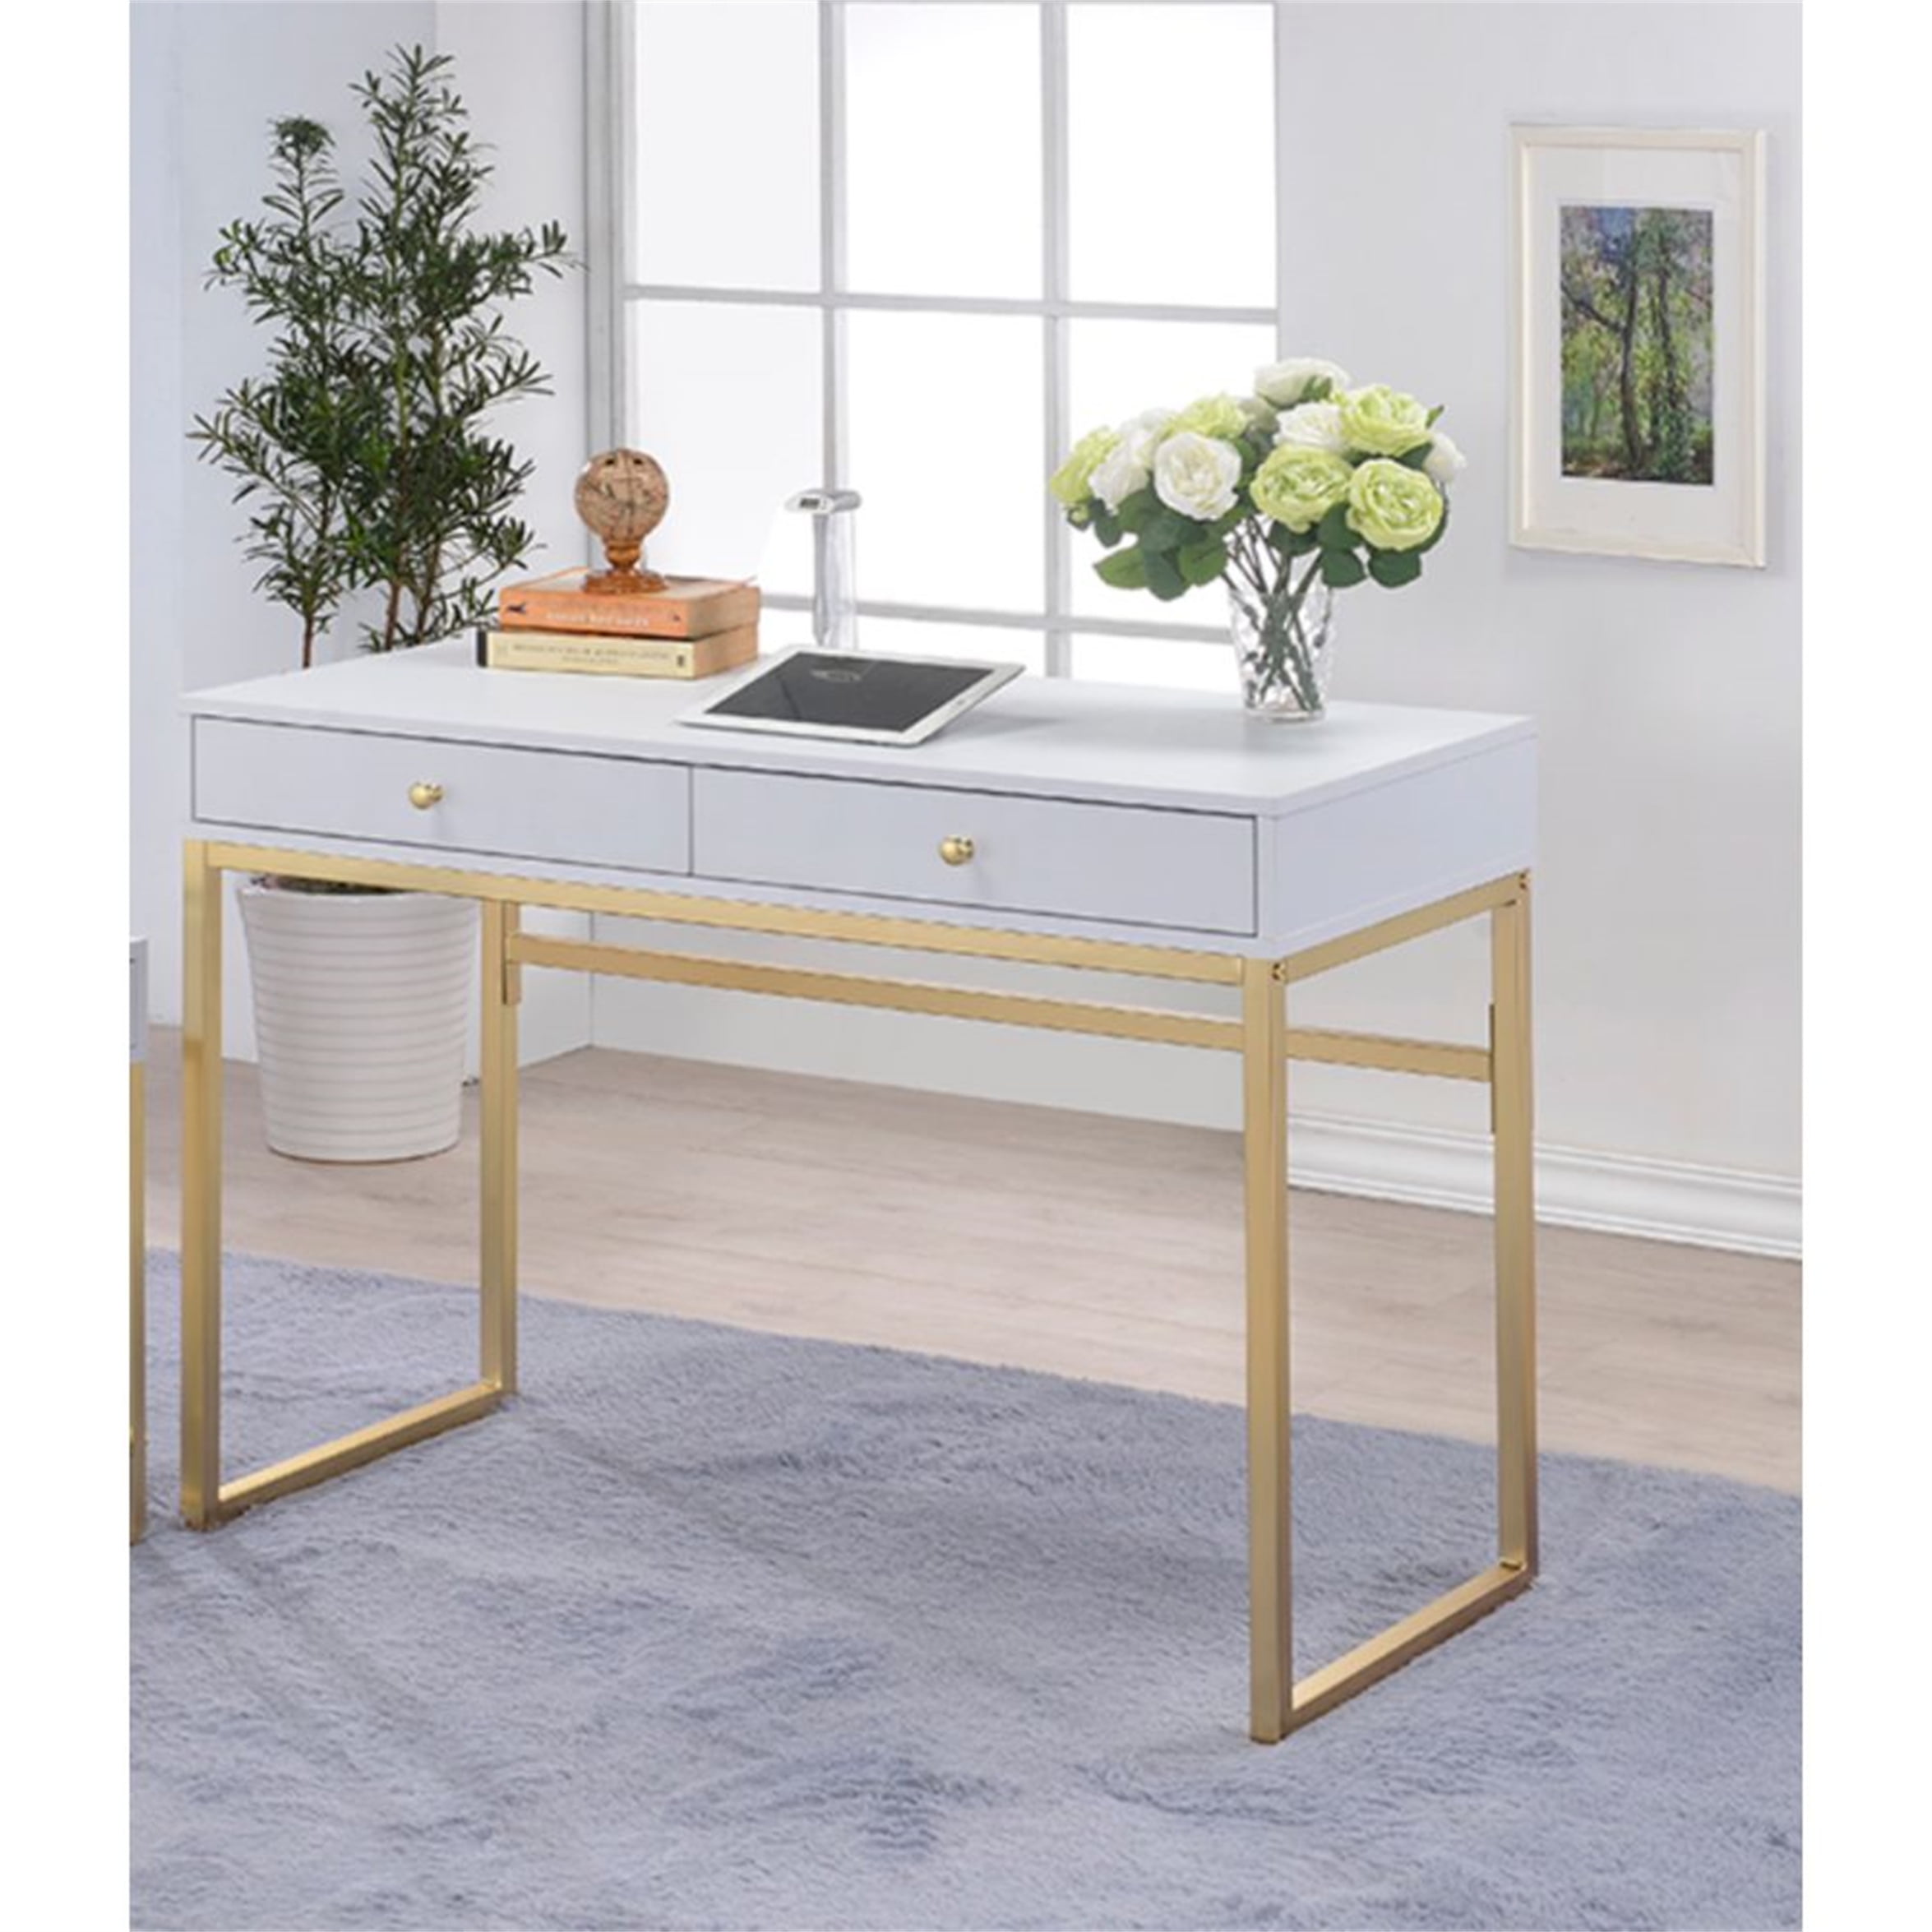 Office Desk Study Table Writing, 42 Inch Writing Desk With Drawers